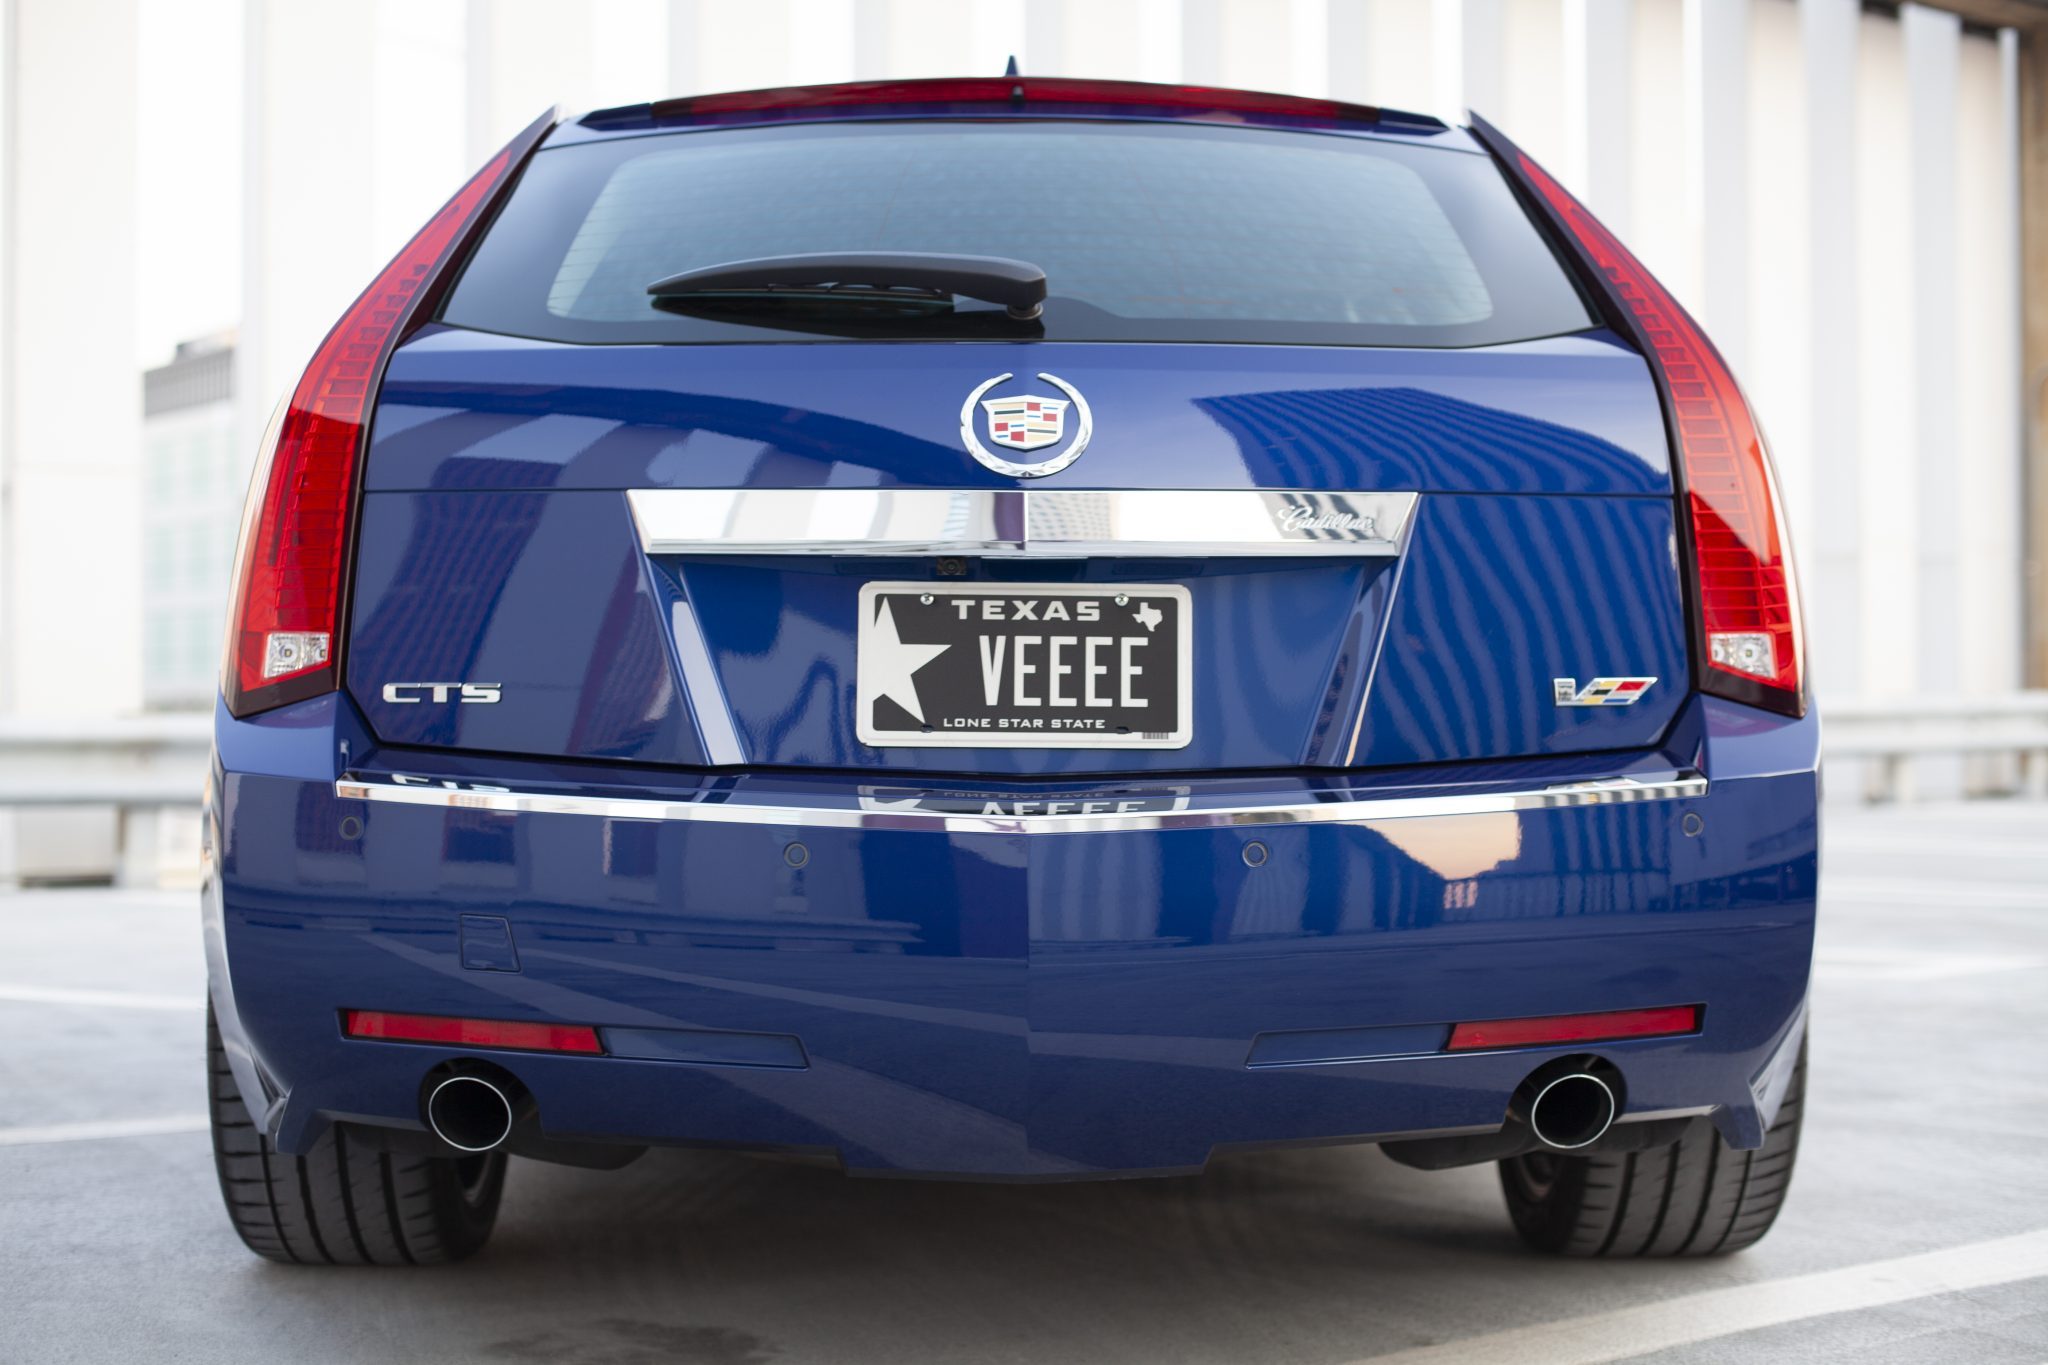 2012 Cadillac CTS-V Wagon in Opulent Blue Metallic